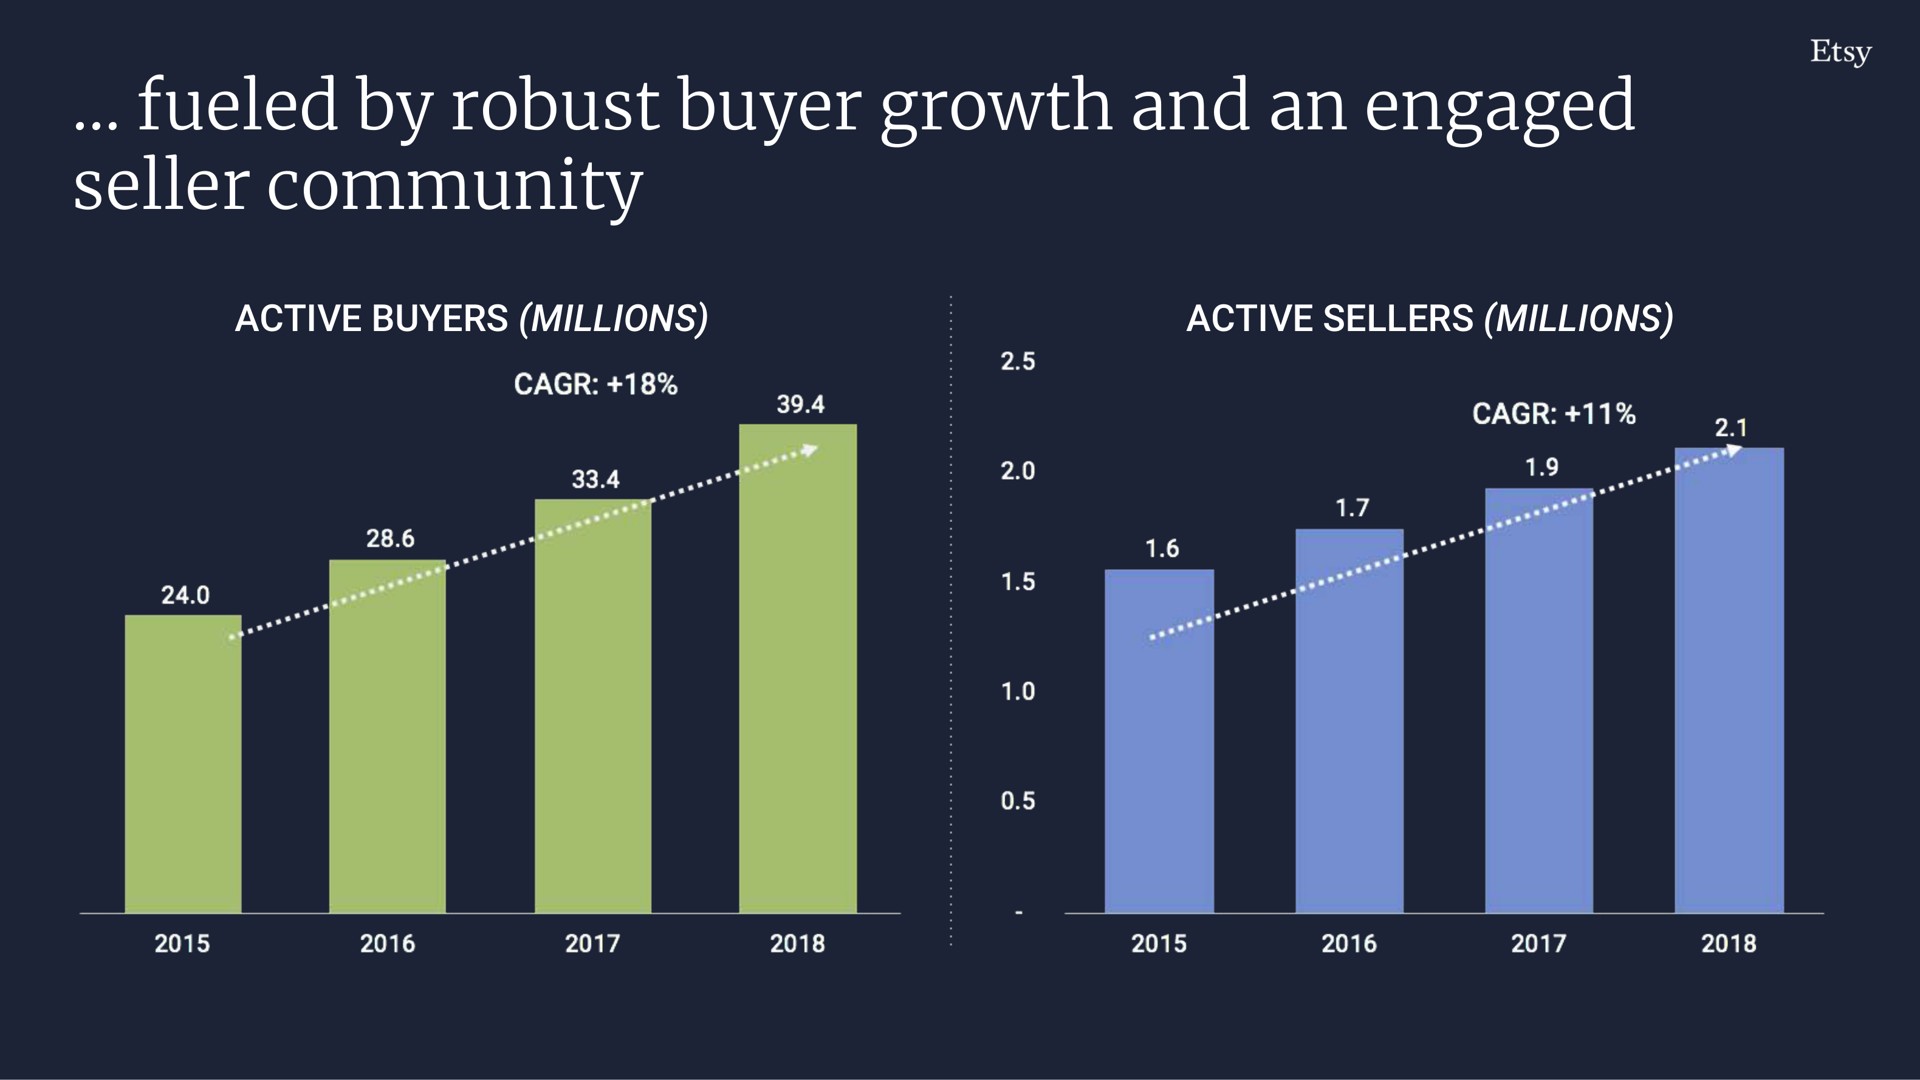 fueled by robust buyer growth and an engaged seller community | Etsy